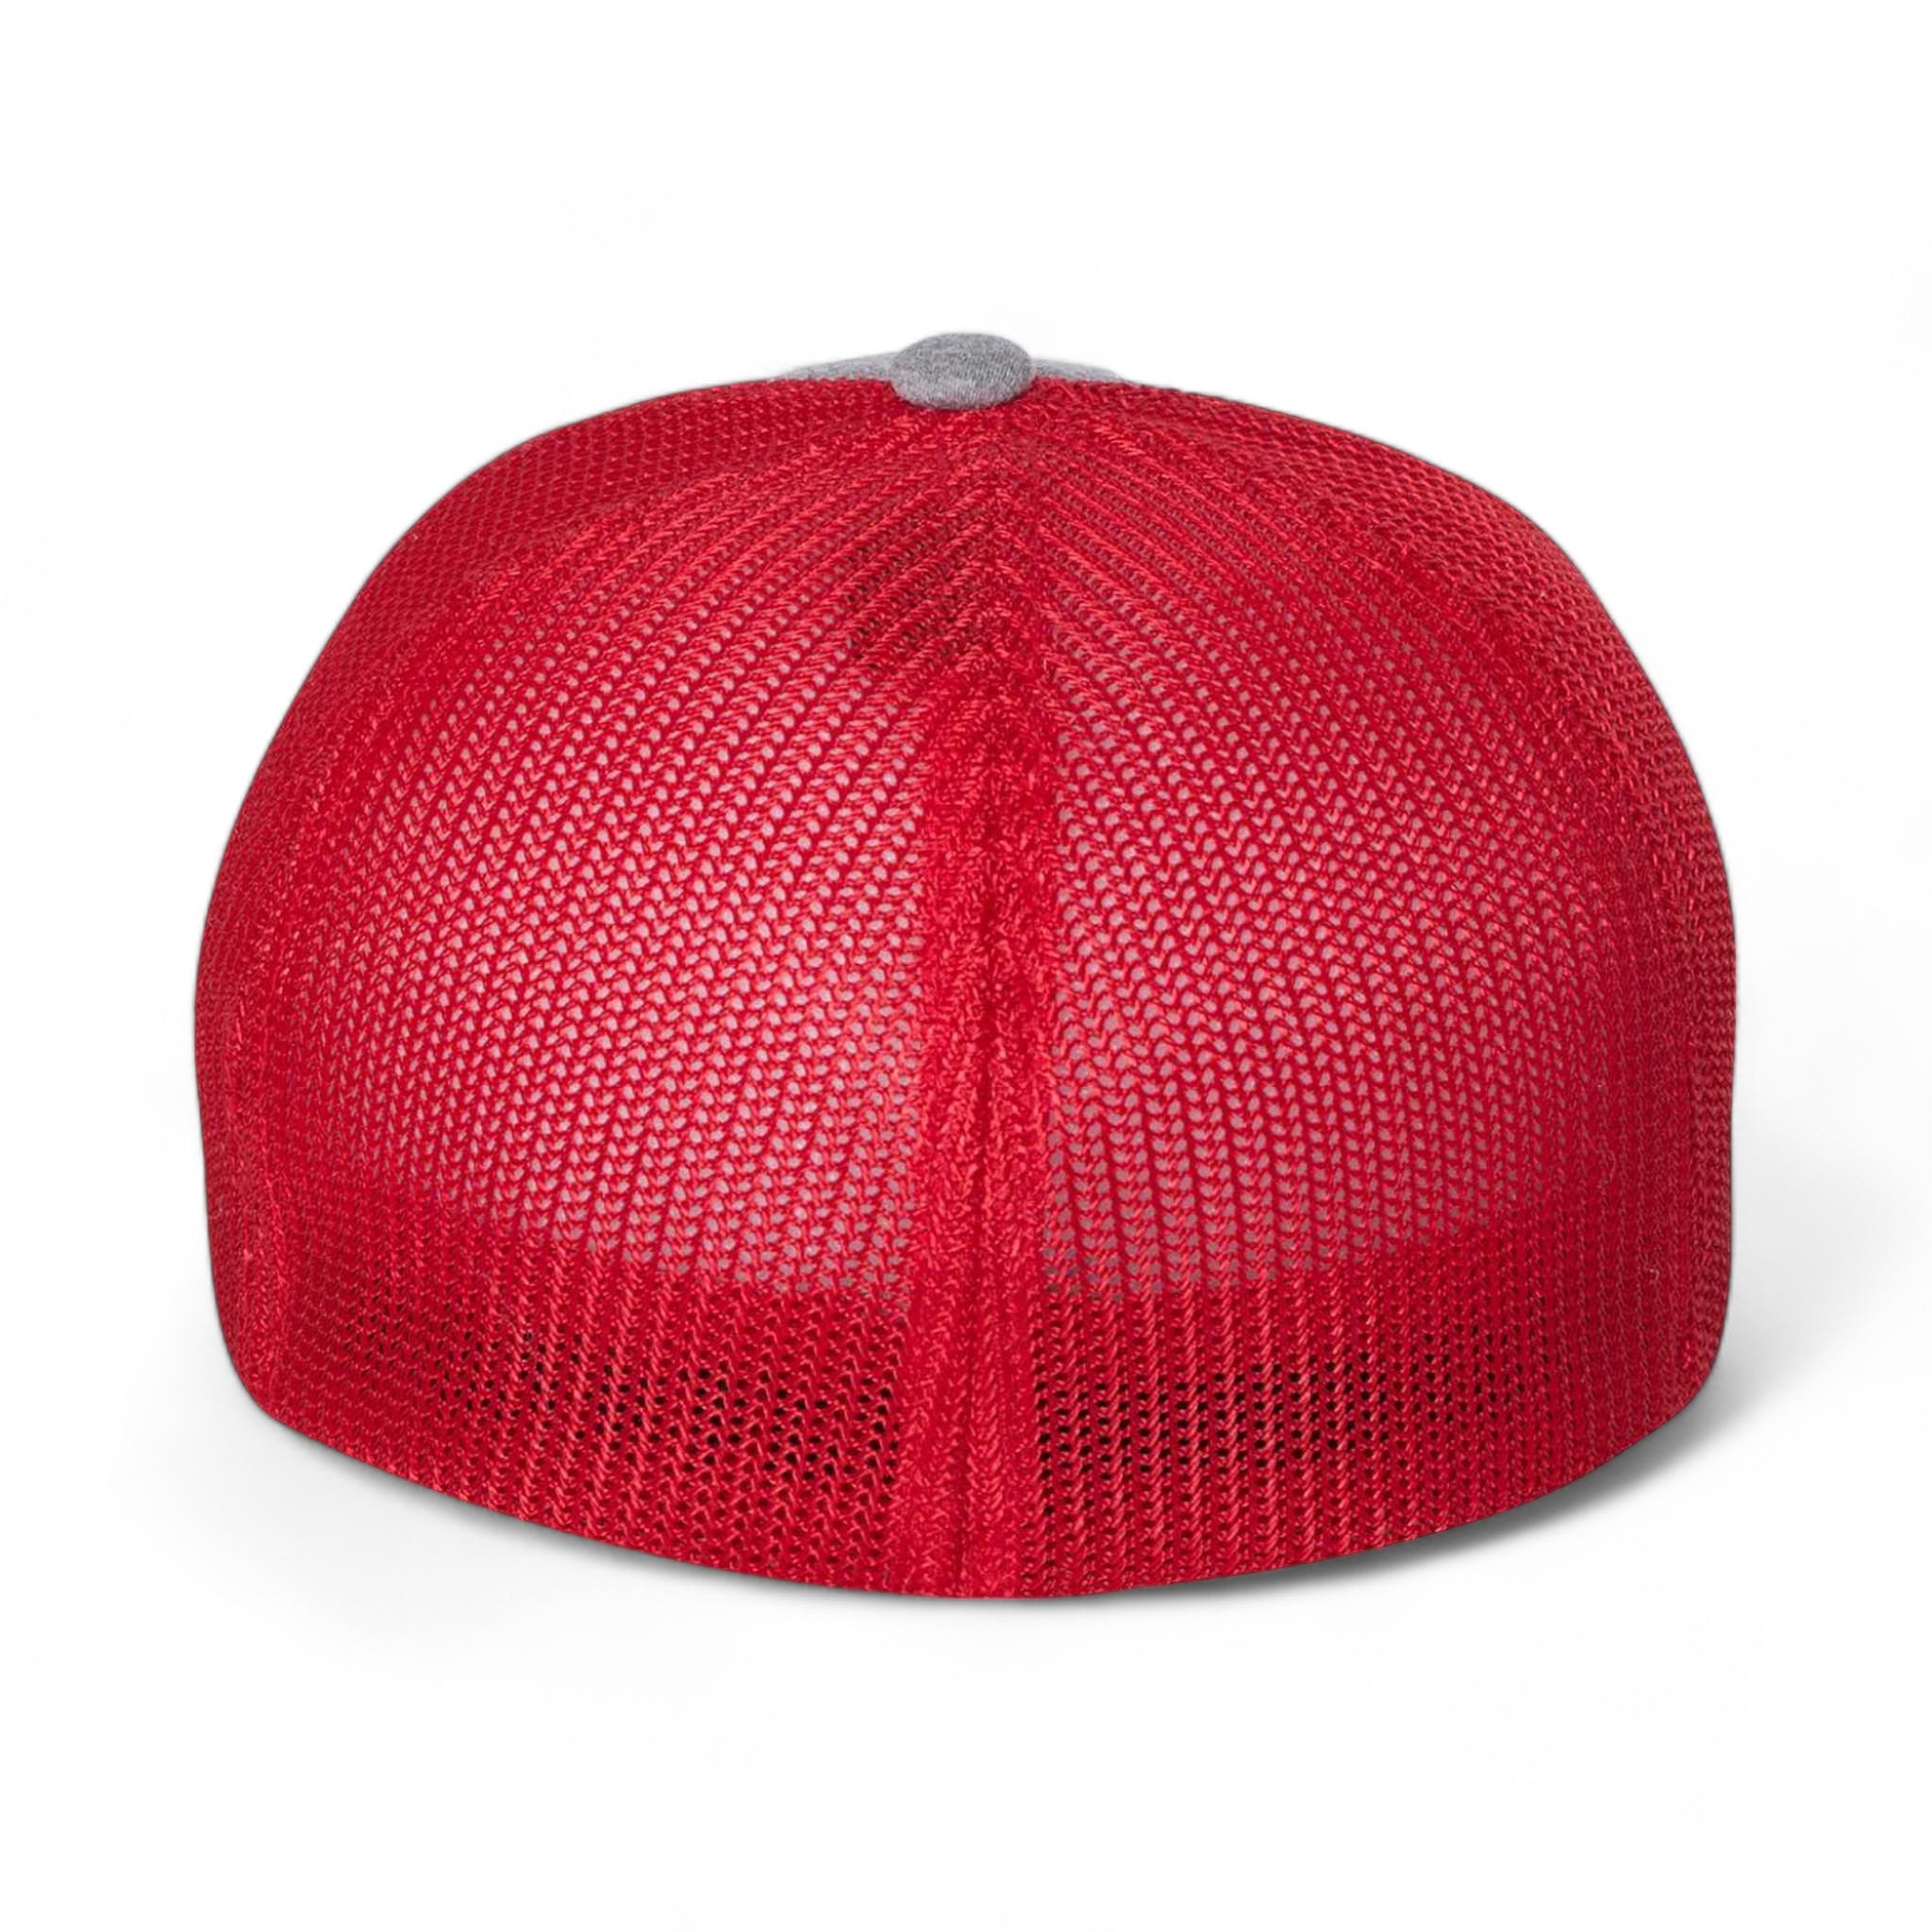 Back view of Flexfit 6311 custom hat in heather grey and red